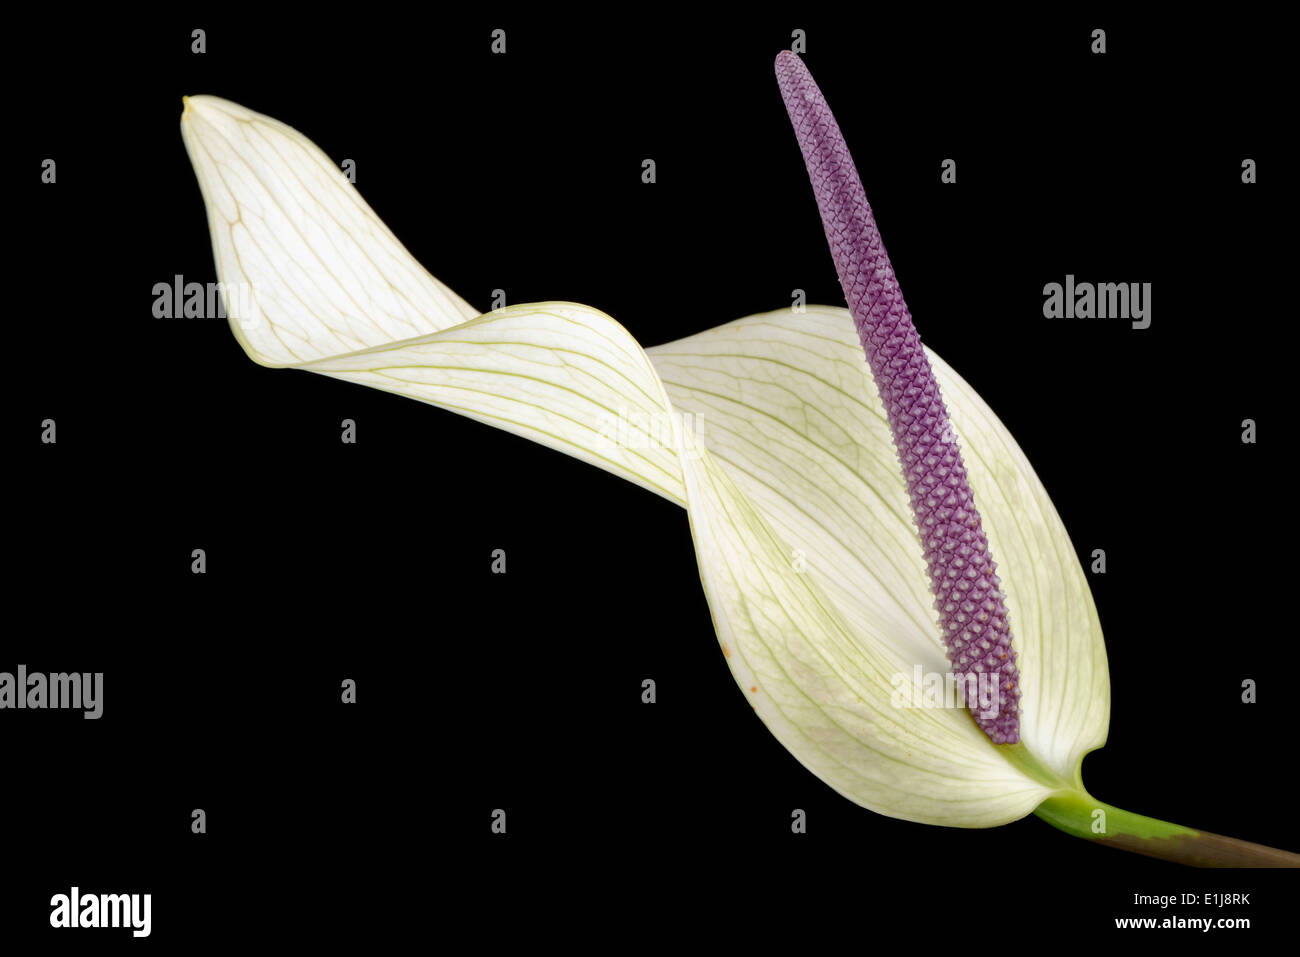 Araceae with lilac pistil in front of black background Stock Photo